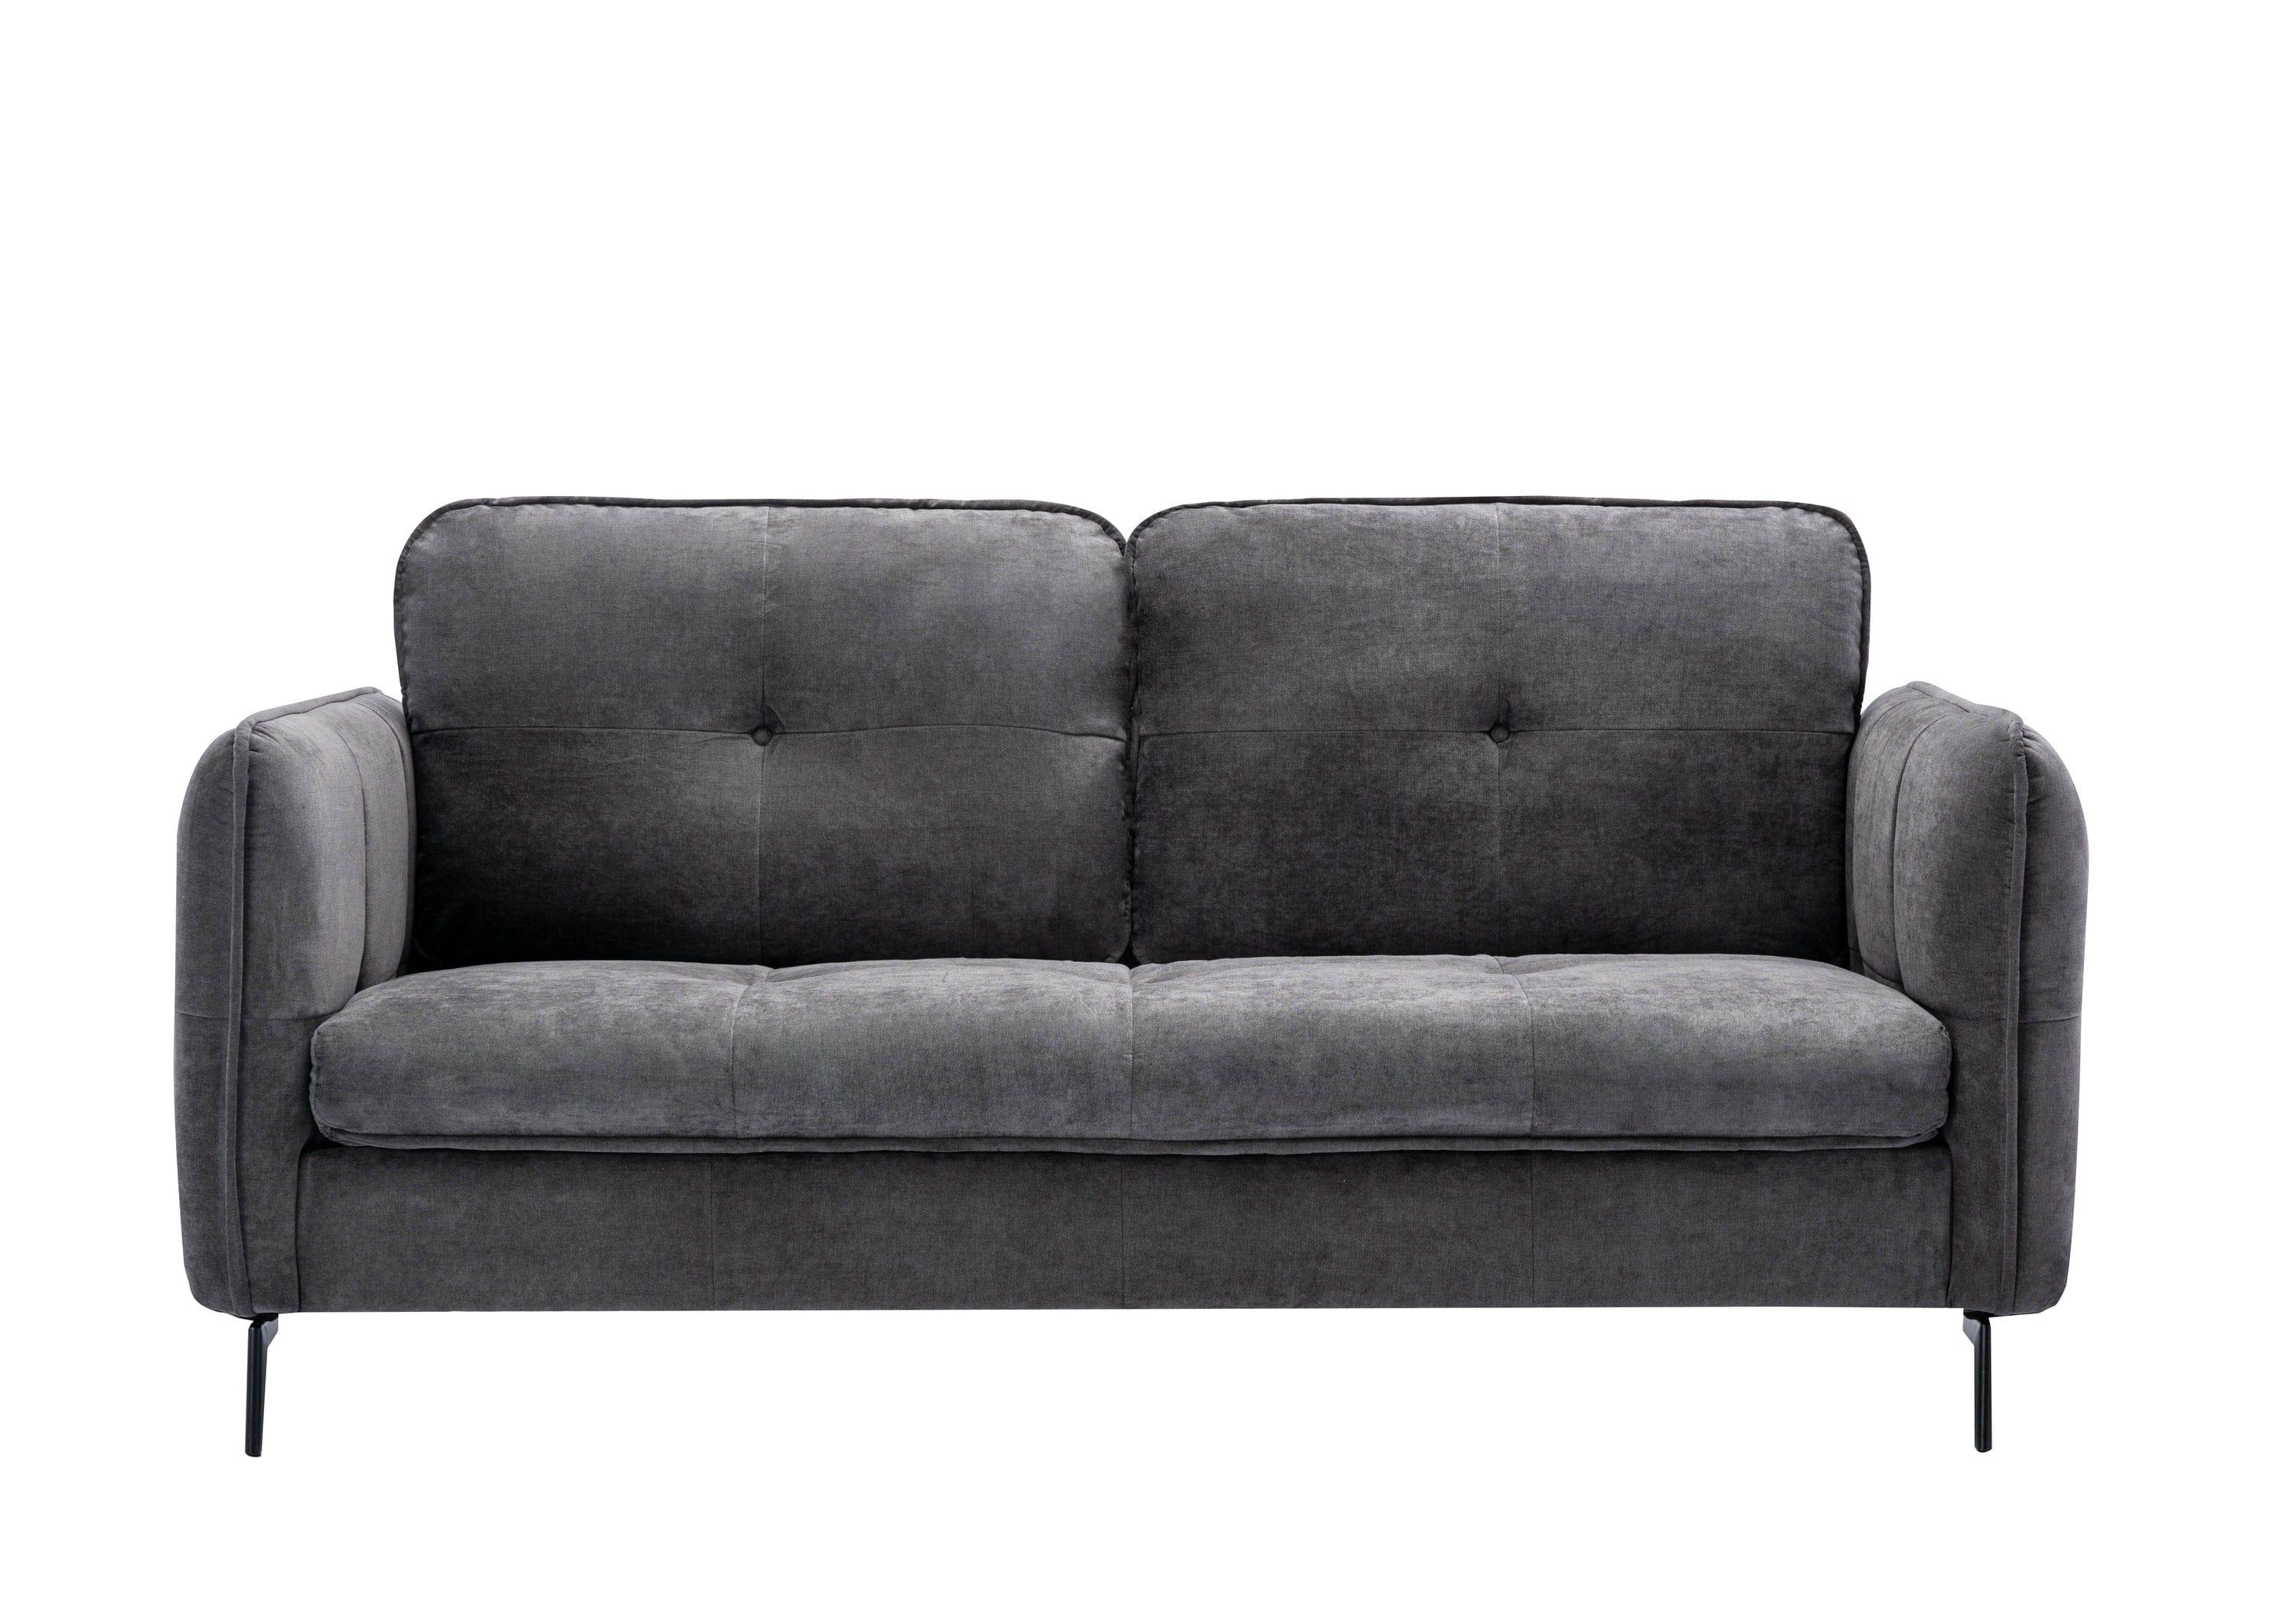 Shop Contemporary Gray Fabric Upholstered 1pc Sofa Button-Tufted and Cushion Seat Black Metal Legs Living Room Furniture Mademoiselle Home Decor